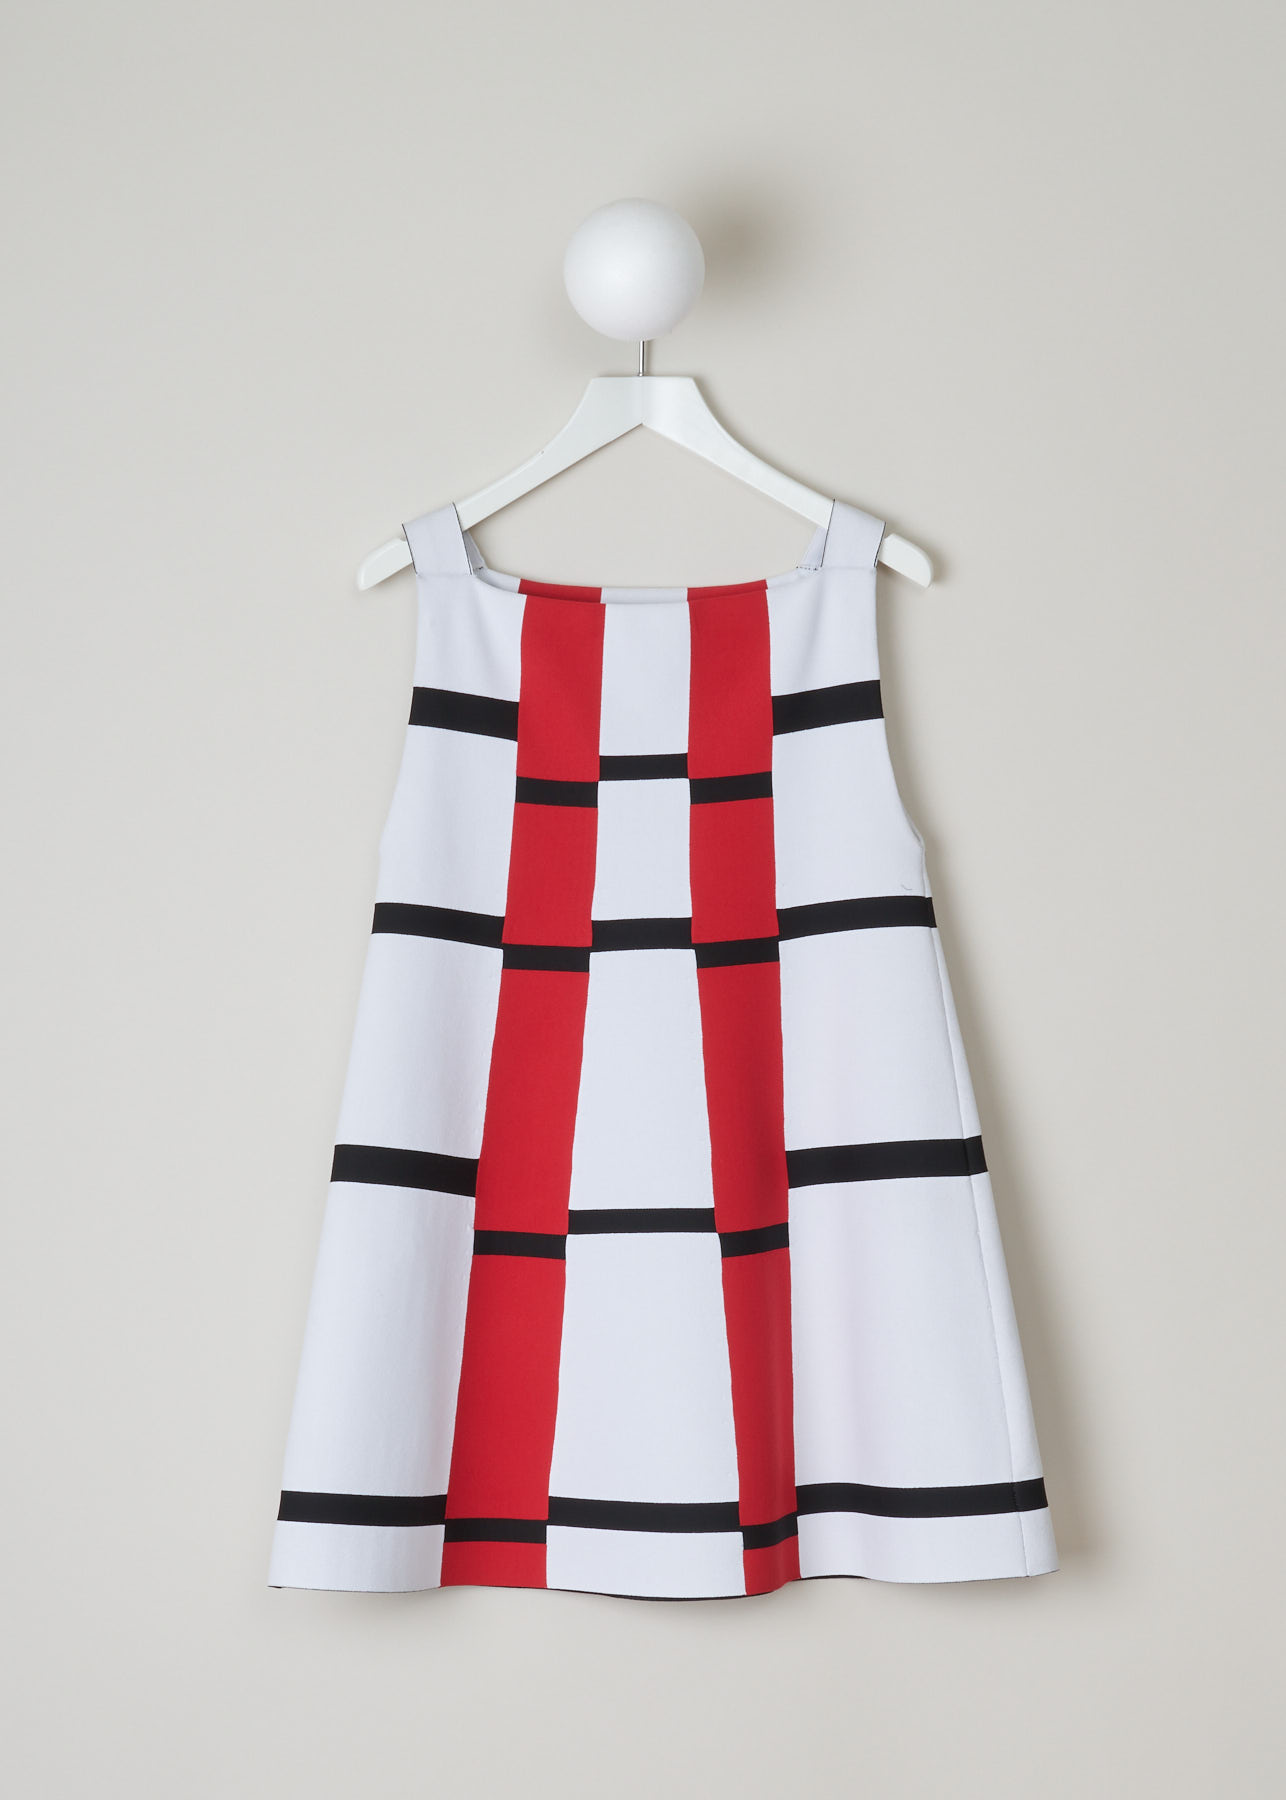 ALAÏA,, GEOMETRIC A-LINE TUNIC, 7E9UE24LM327_tunique_sm_mirage_CM00_multico00, Print, White, Red, Front, Knitted A-line tunic in sixties style. The dress is made with a graphic patterned fabric in white, red and black. This model has an elegant, straight neckline, is a slip-on without zip and buttons and come in right under the knee.
